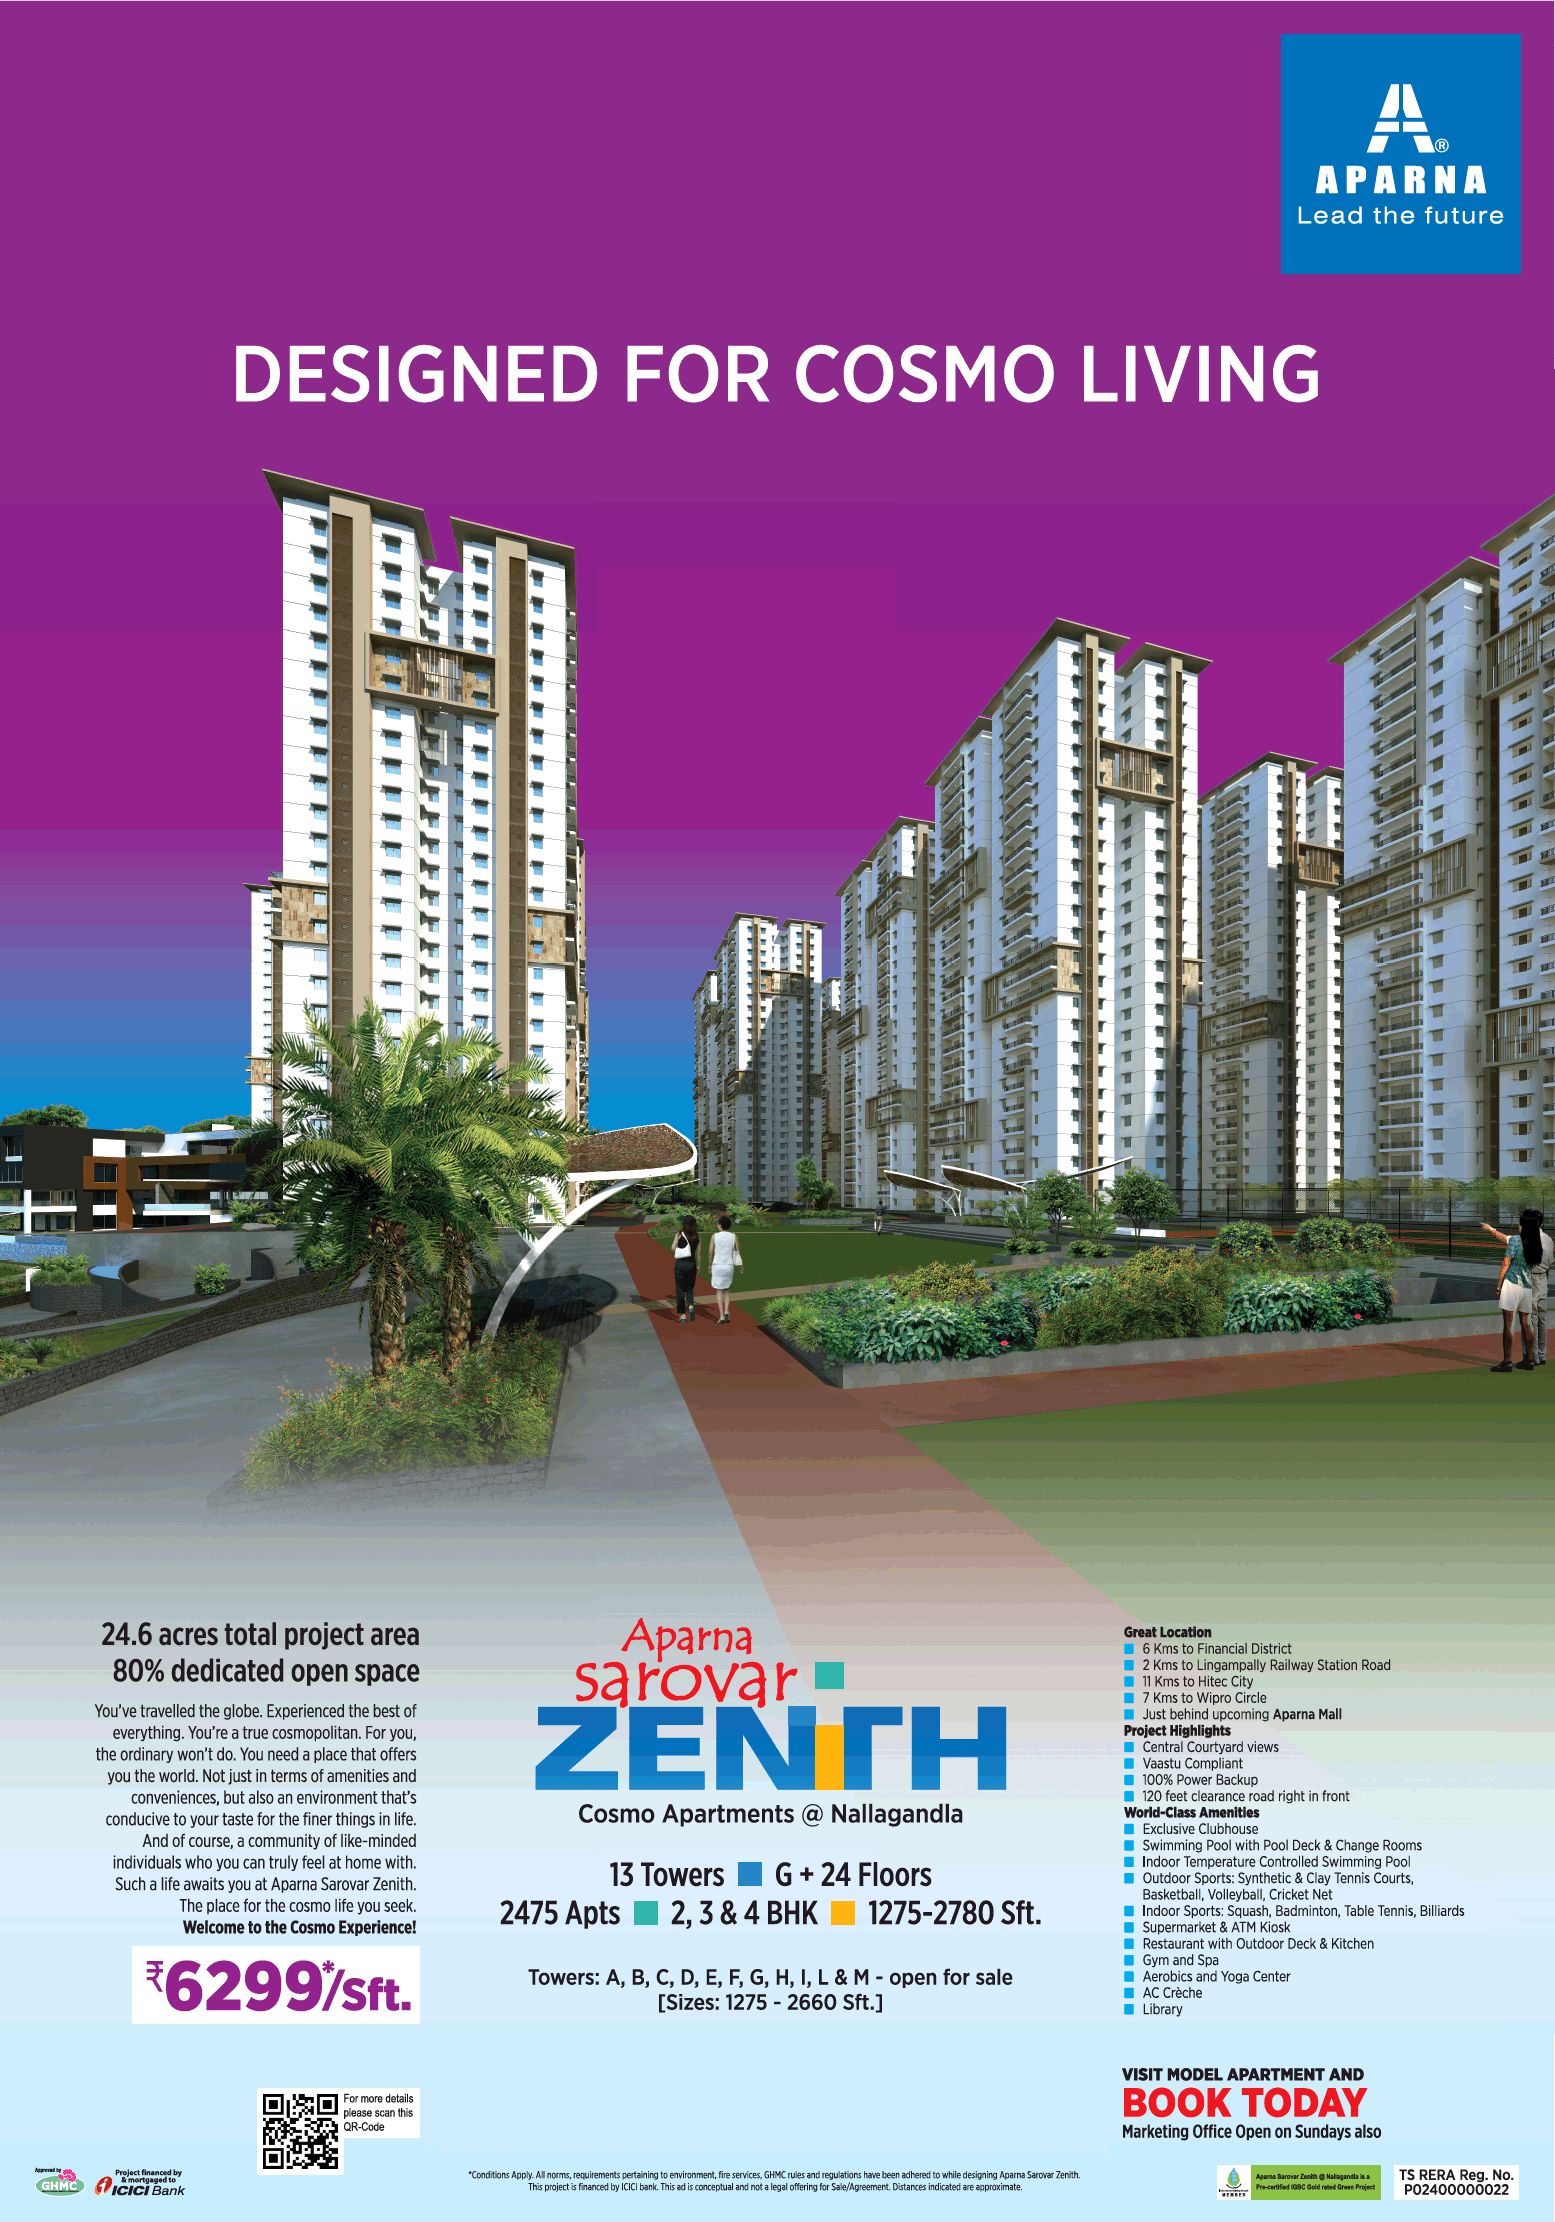 Designed for cosmo living at Aparna Sarovar Zenith in Hyderabad